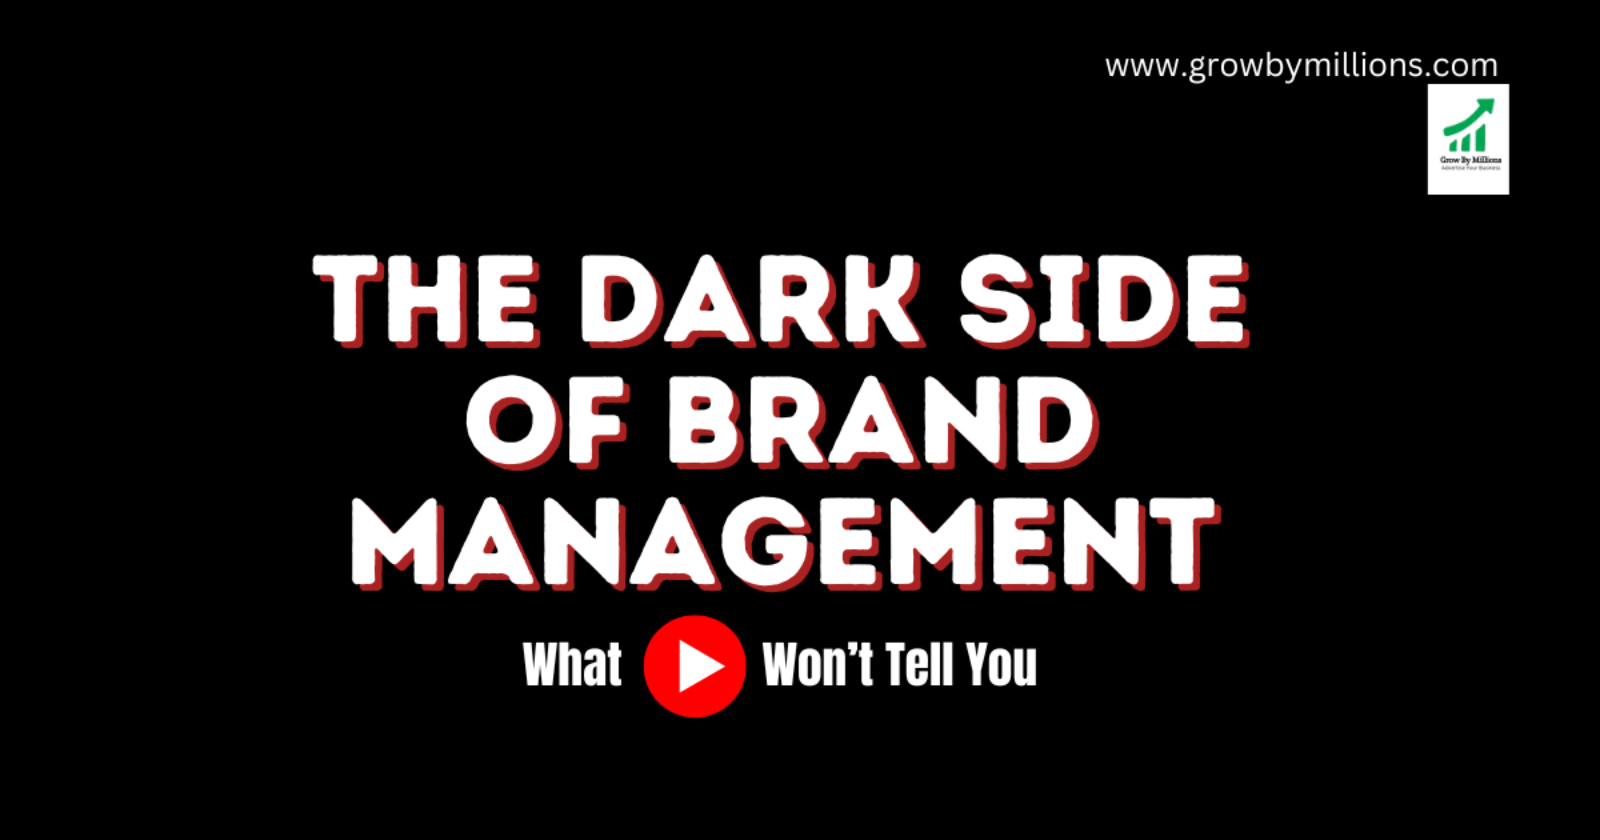 grow by millions tell the dark side of brand management youtube won't tell you